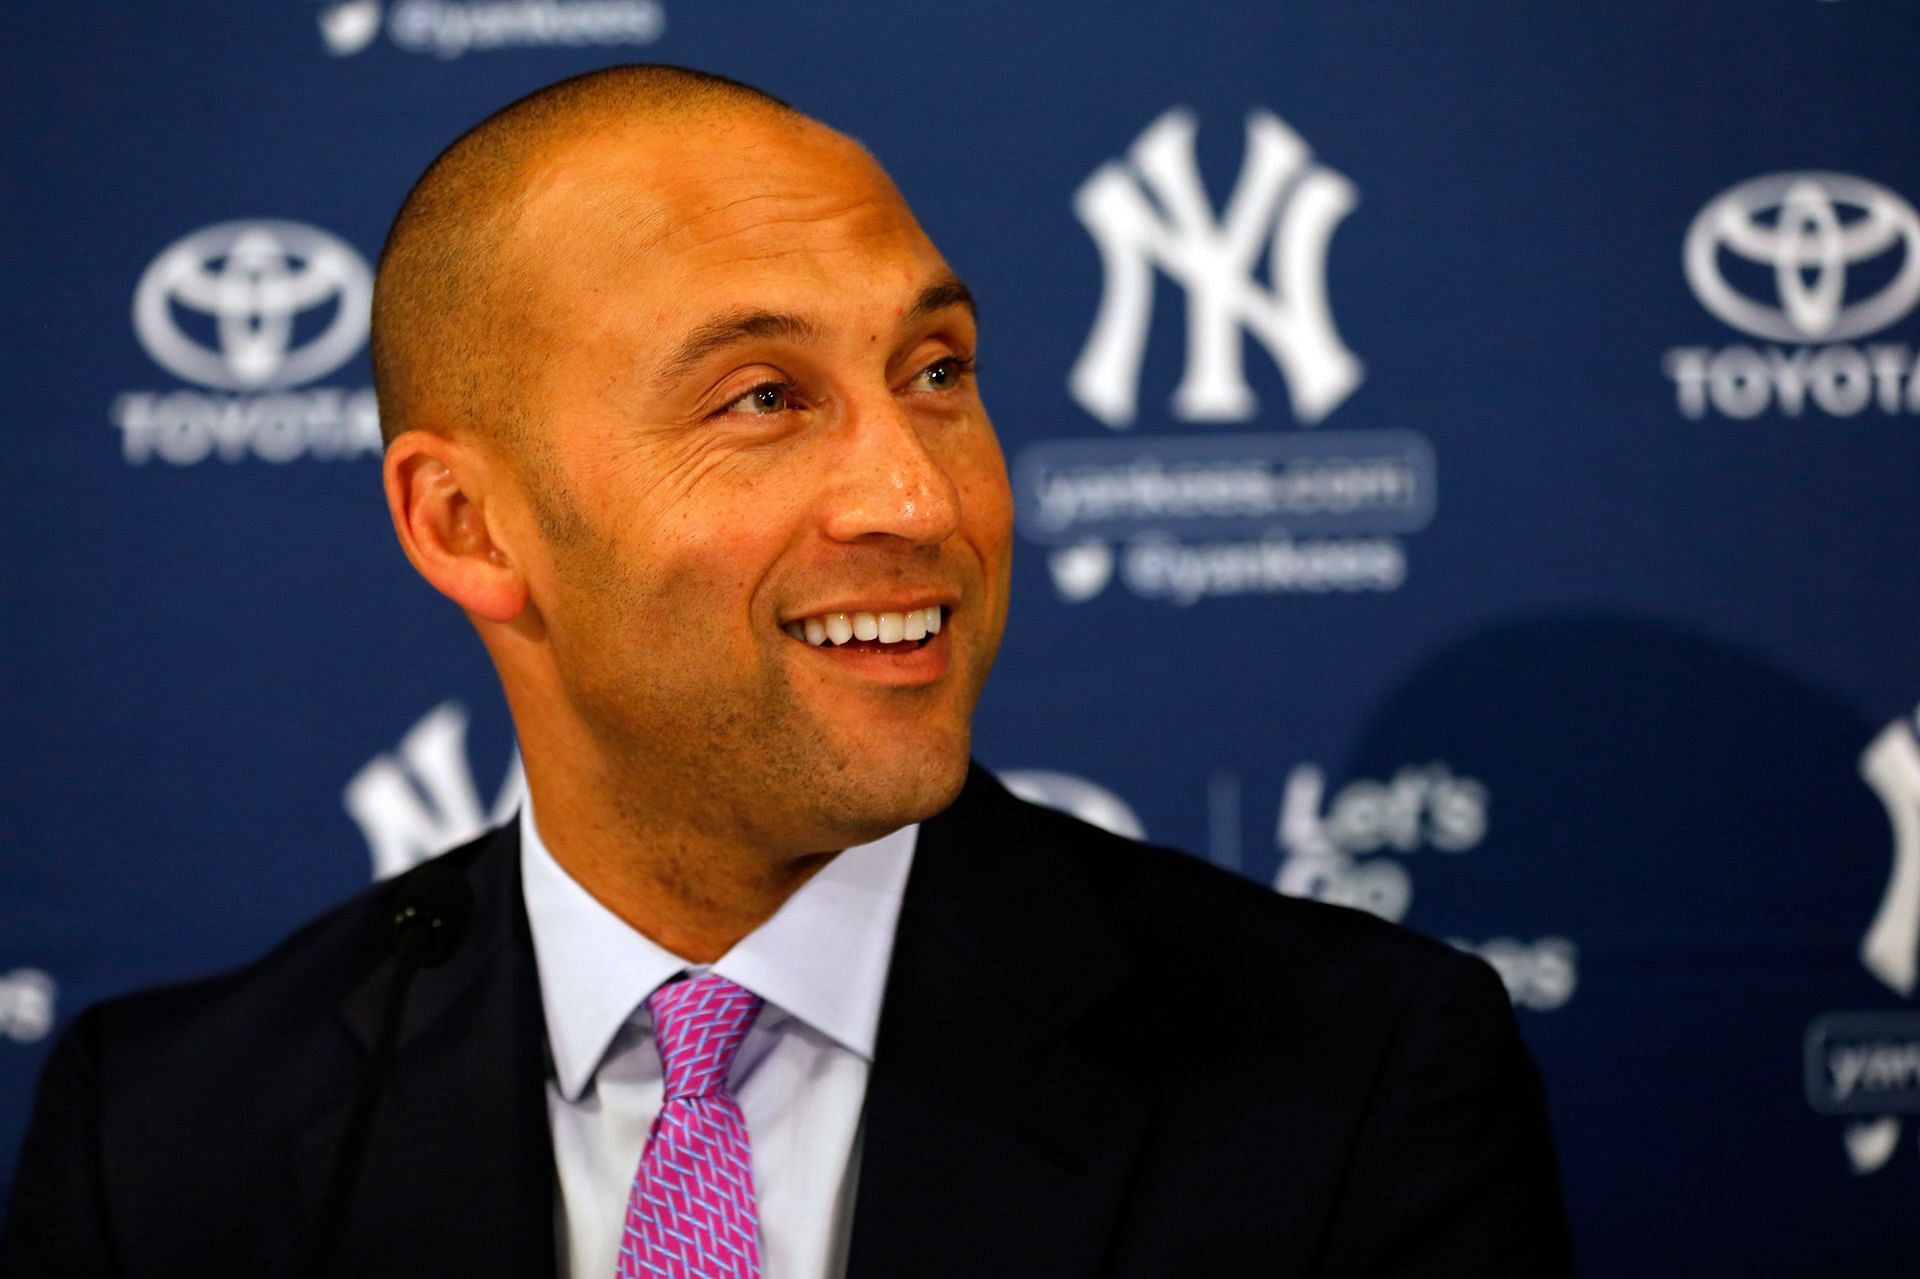 WATCH: Derek Jeter gives thanks to New York Yankees organization and its  fans for their support in return to Yankee Stadium for Hall of Fame Tribute  Night